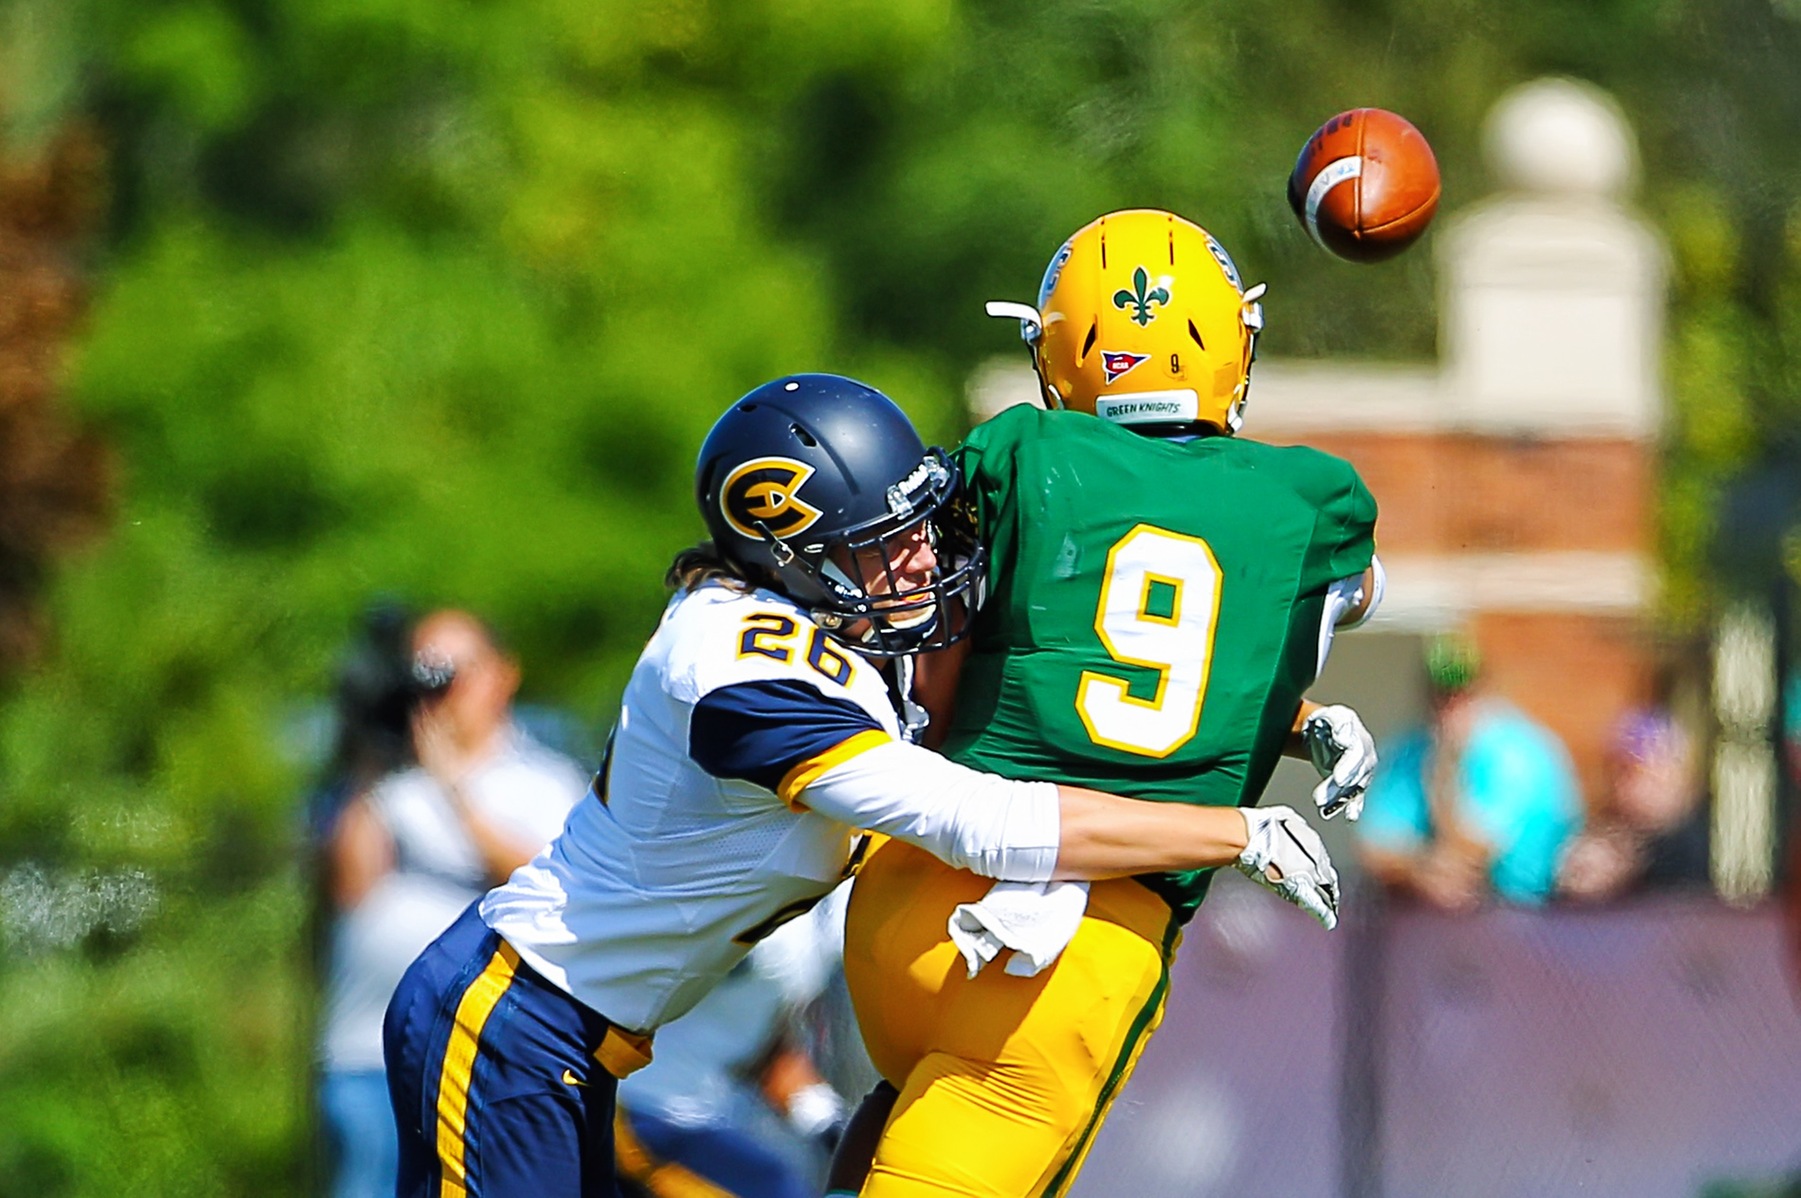 Blugolds fall on the road to St. Norbert, 27-21